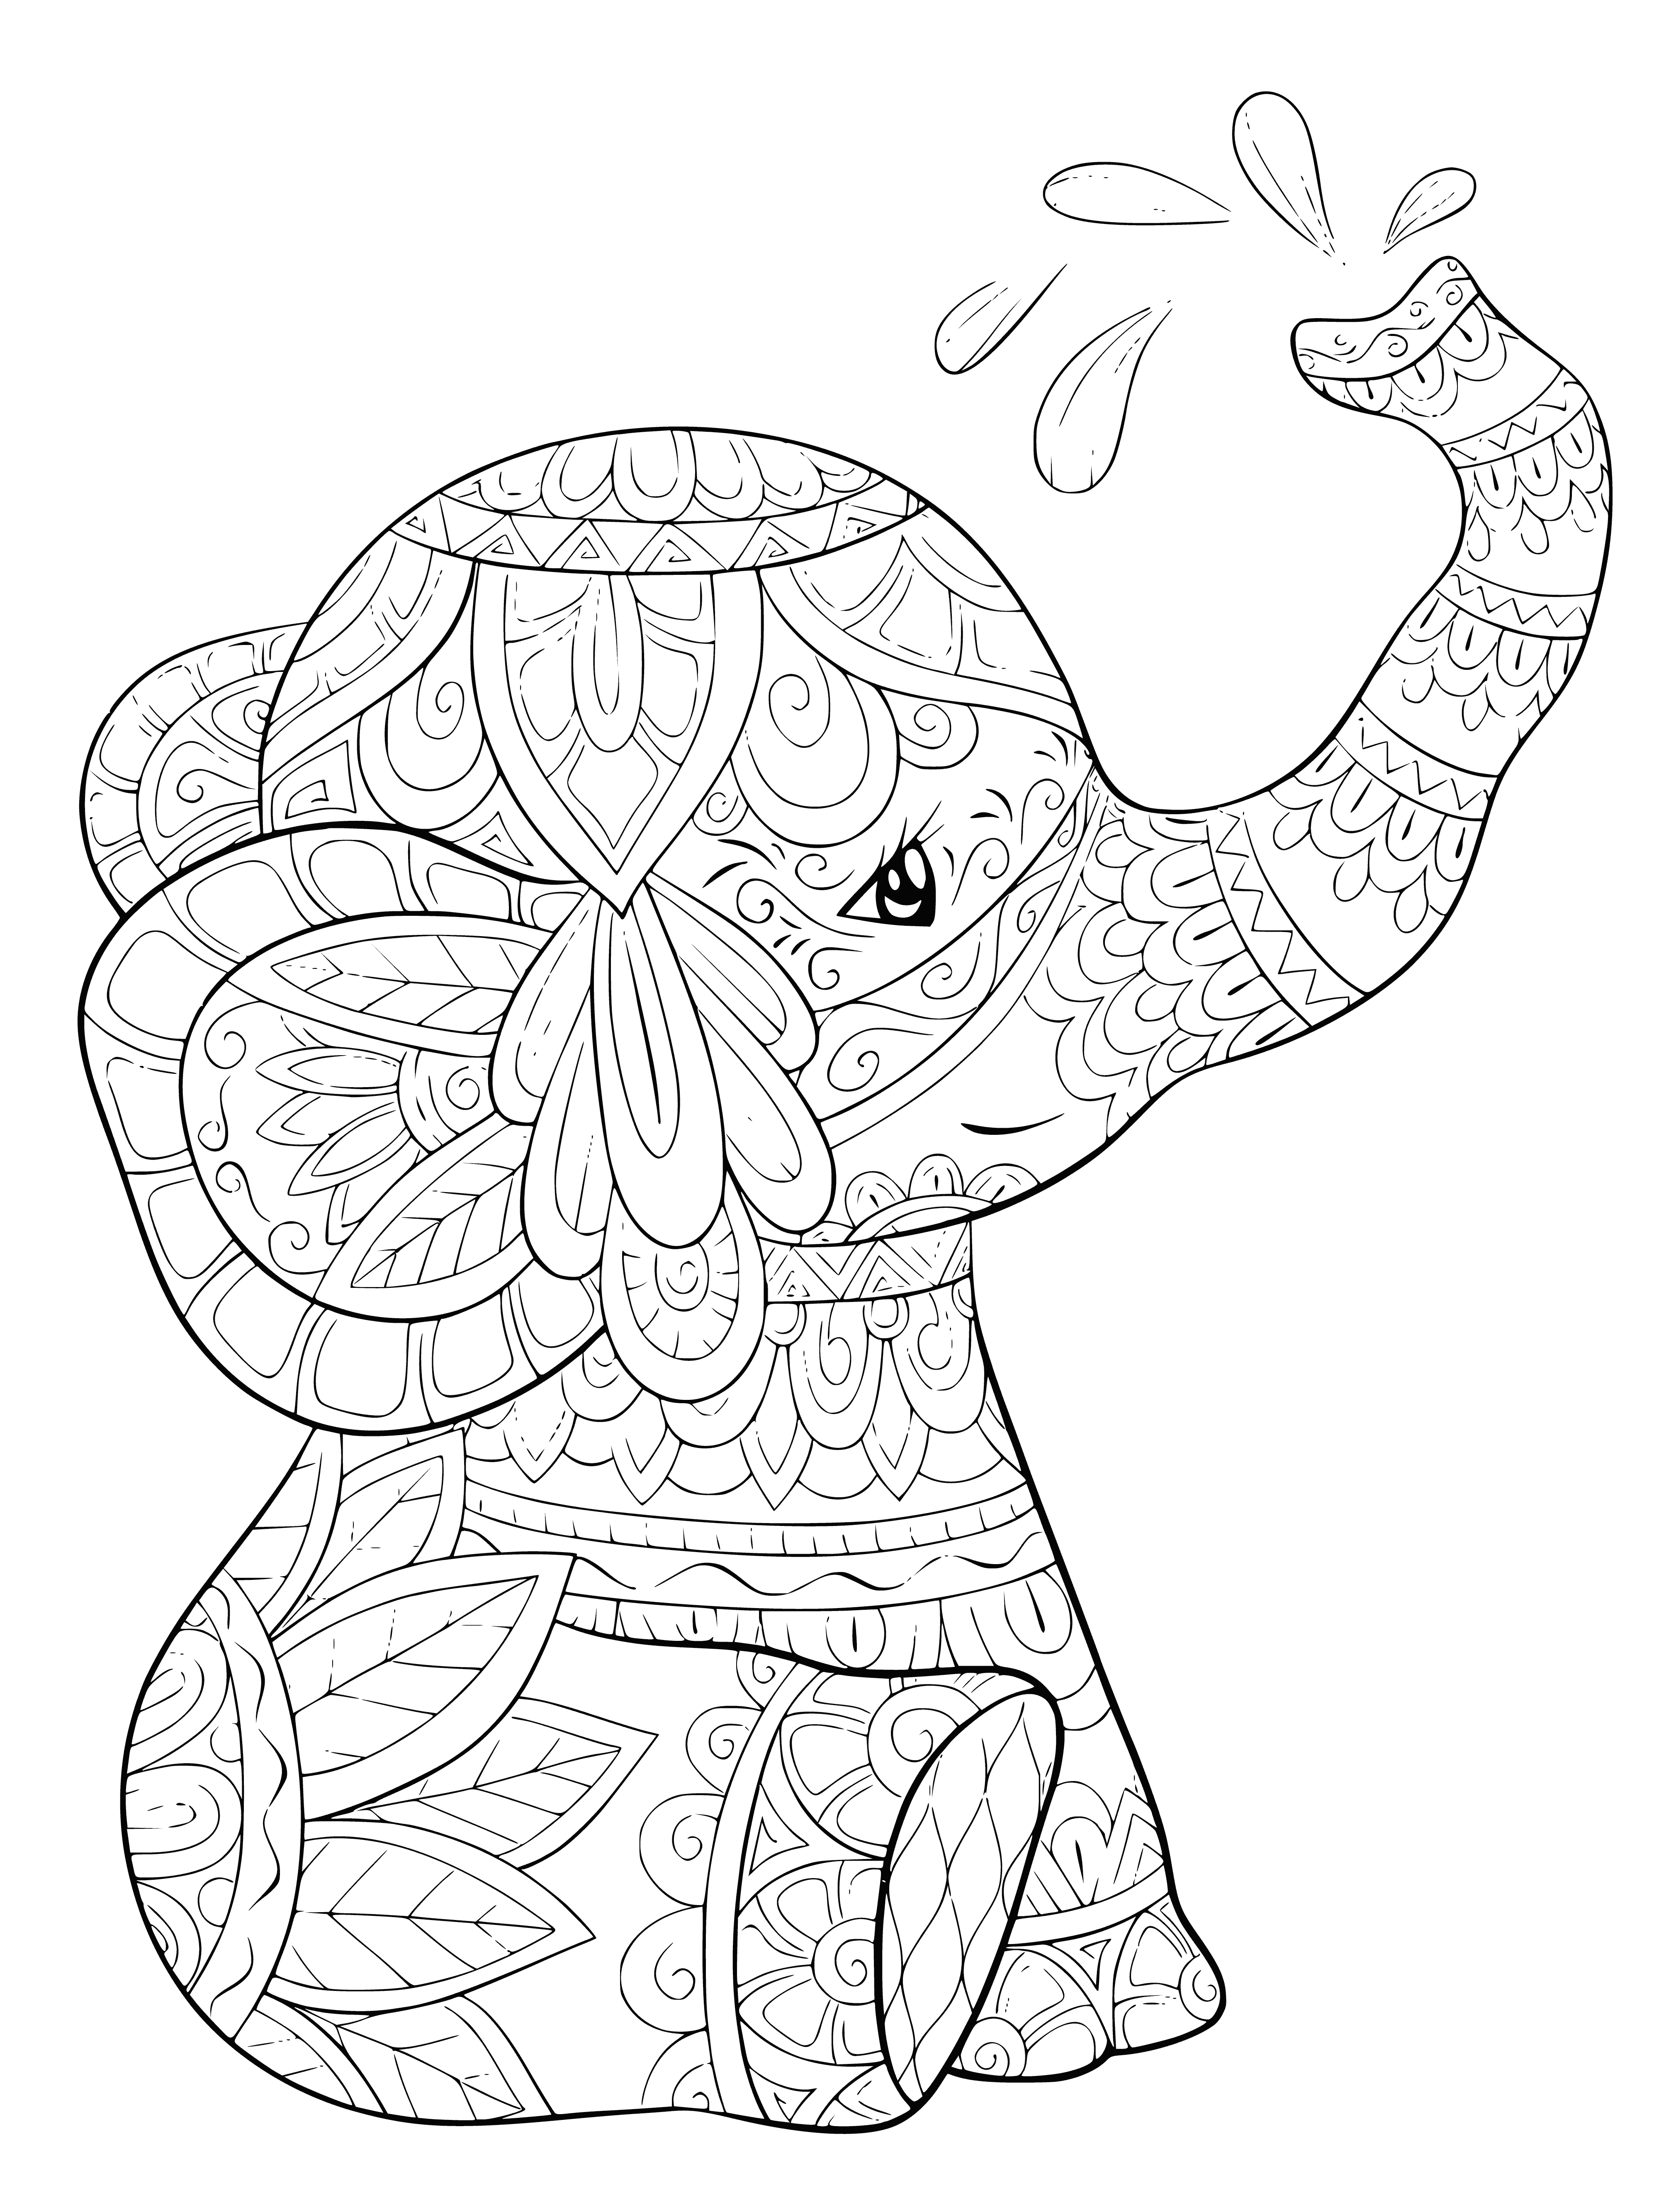 coloring page: A baby elephant in the center of the page with colorful surrounding animals and plants.